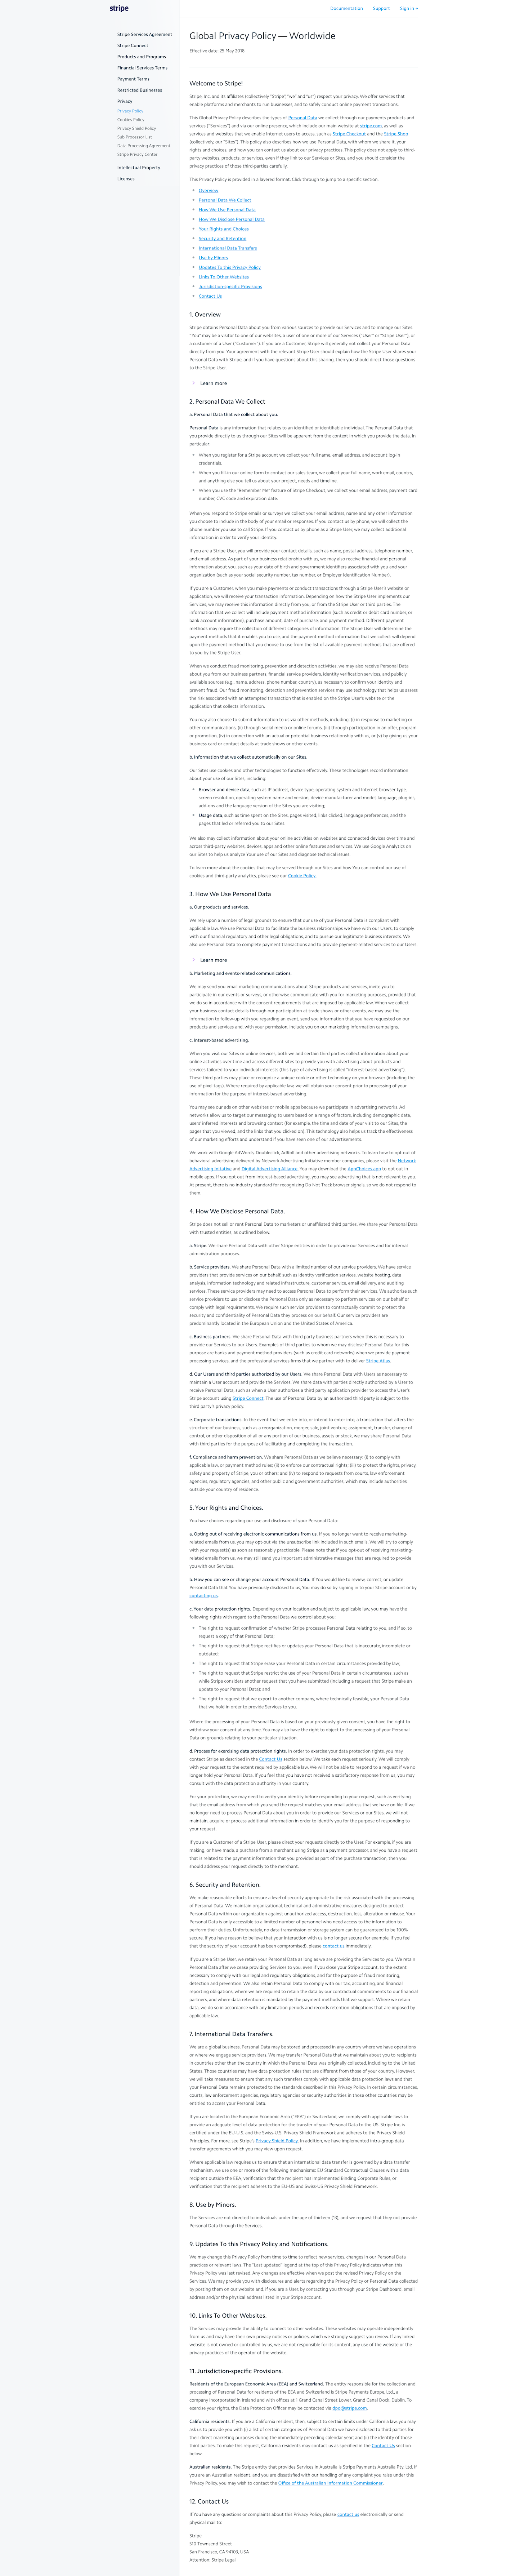 Screenshot of the Privacy Policy page from the Stripe website.